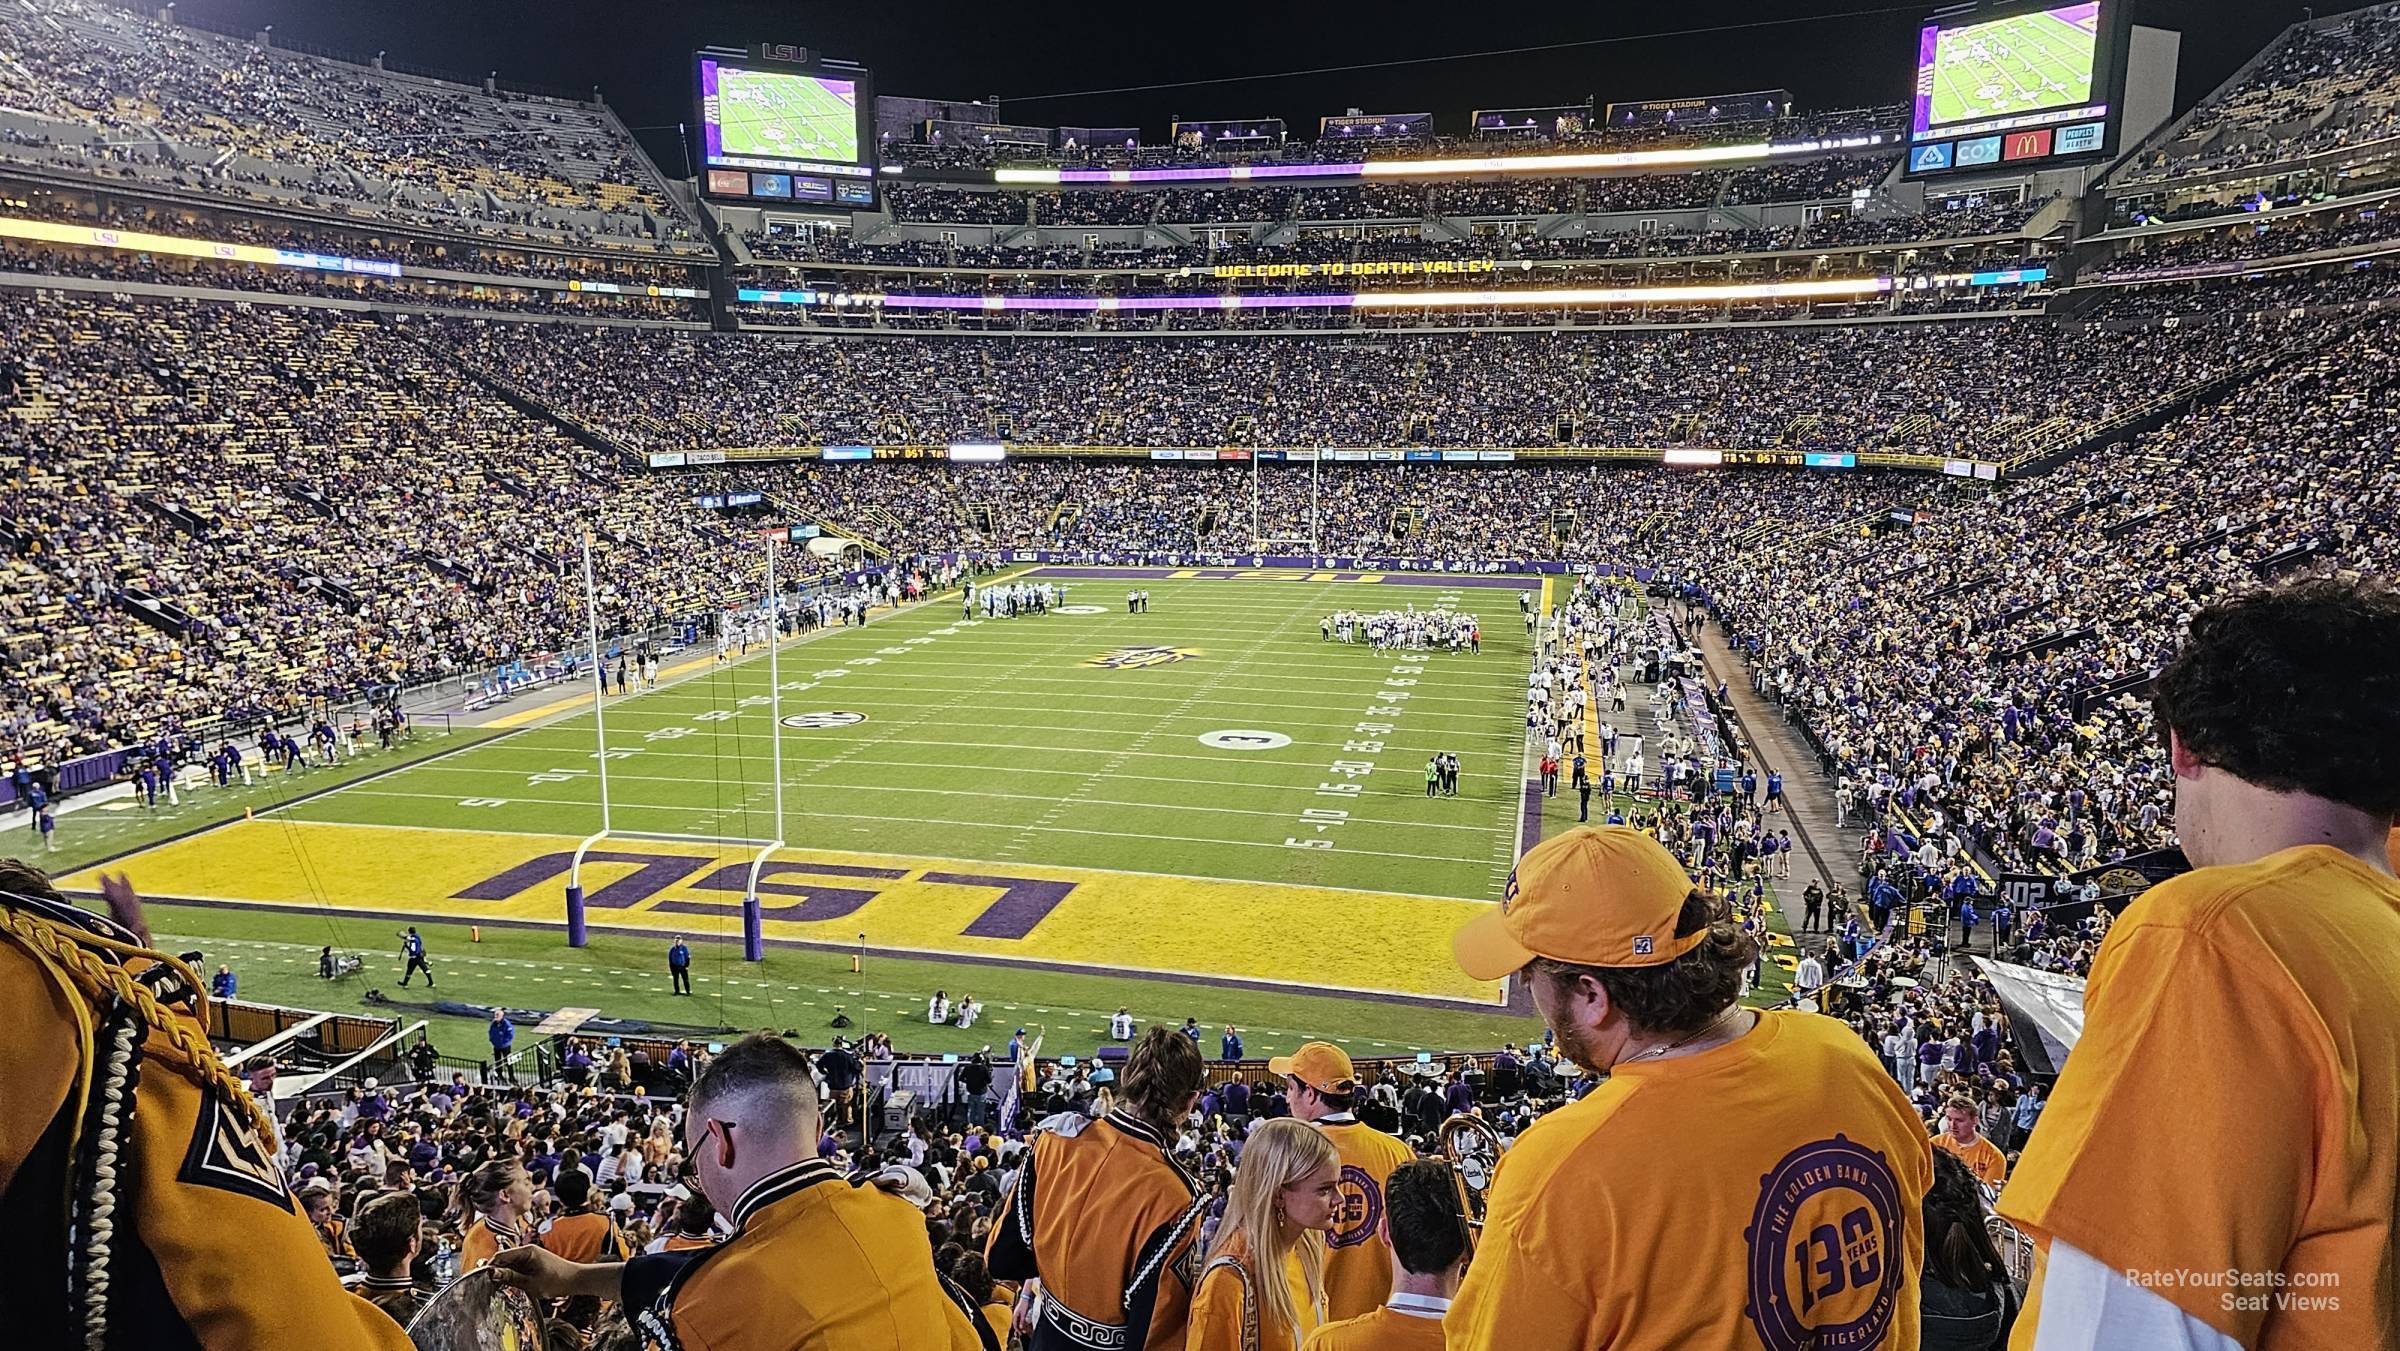 section 230, row 1 seat view  - tiger stadium